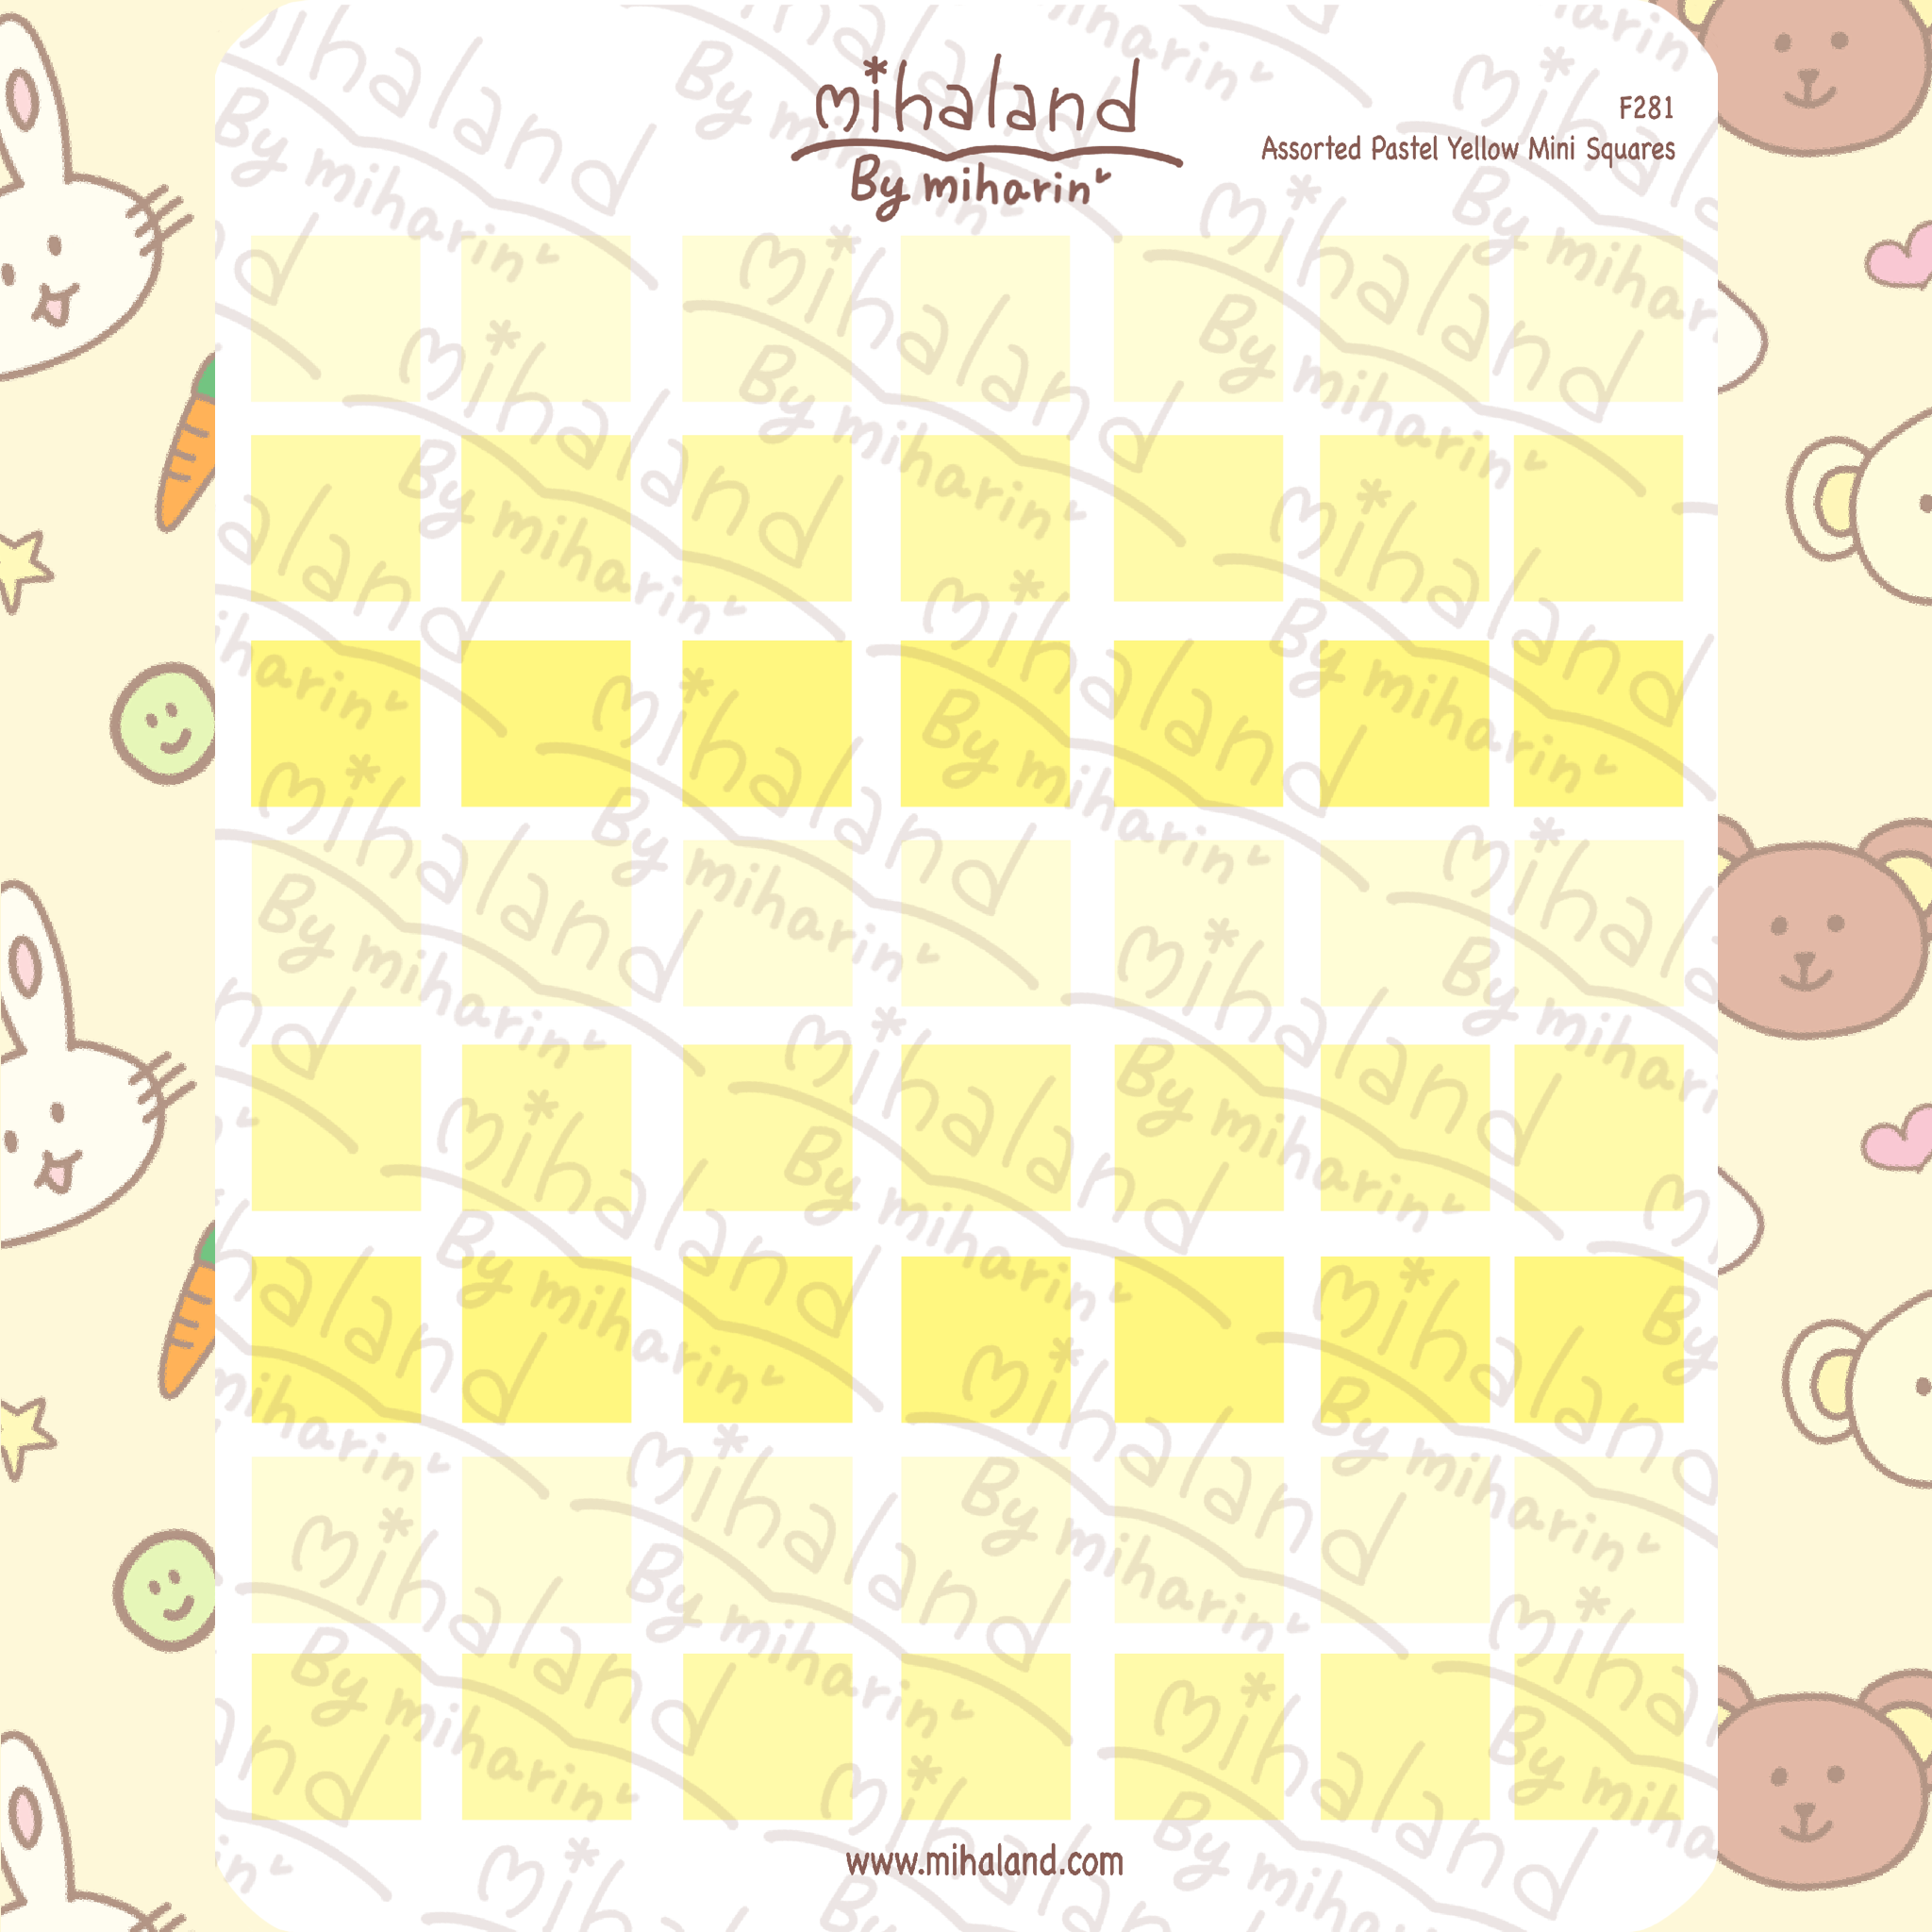 Assorted Pastel Yellow Mini Squares Planner Stickers (F281)